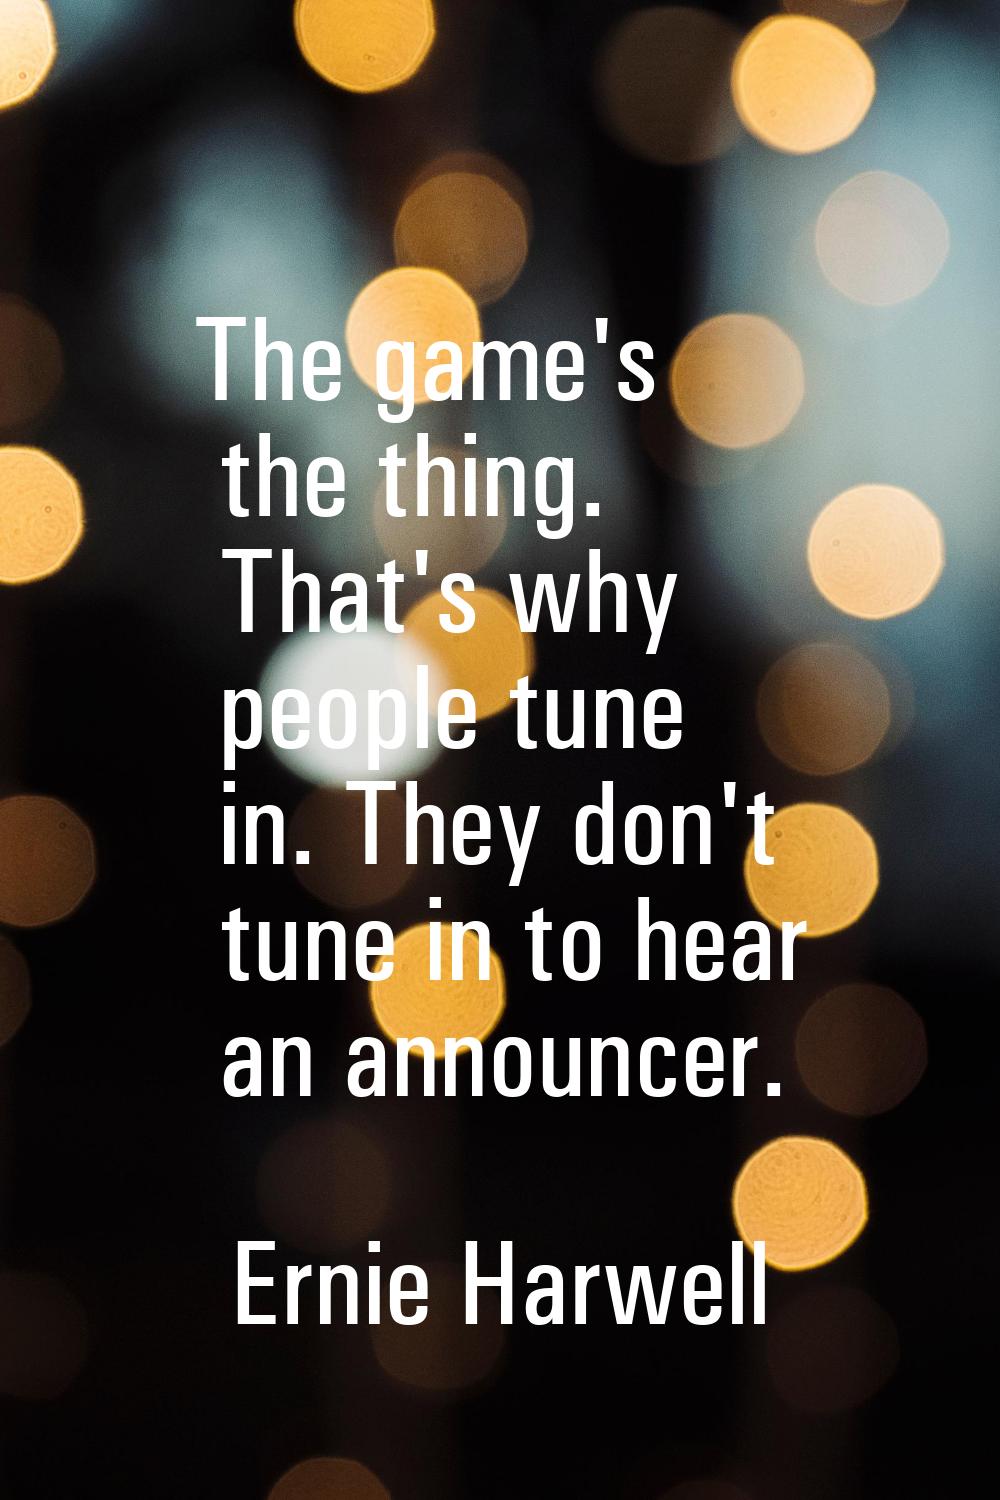 The game's the thing. That's why people tune in. They don't tune in to hear an announcer.